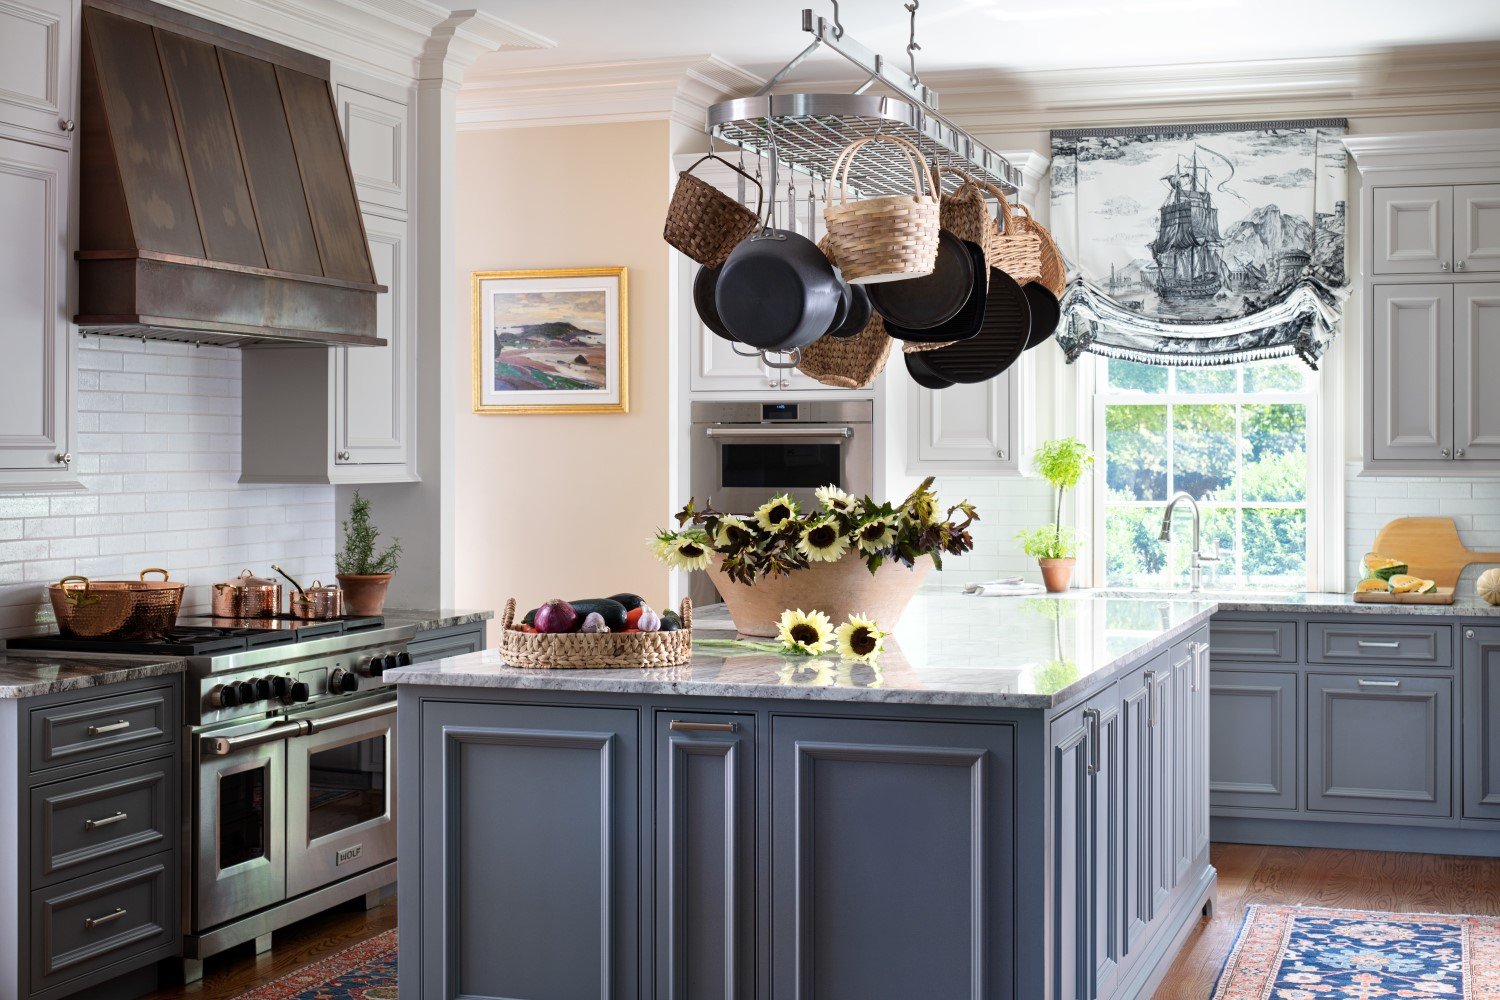  This kitchen by Bridget Beari Designs has a classic French feel with the antiqued range hood, the central pot rack hung with baskets and pans, and the rich blue on the cabinetry 